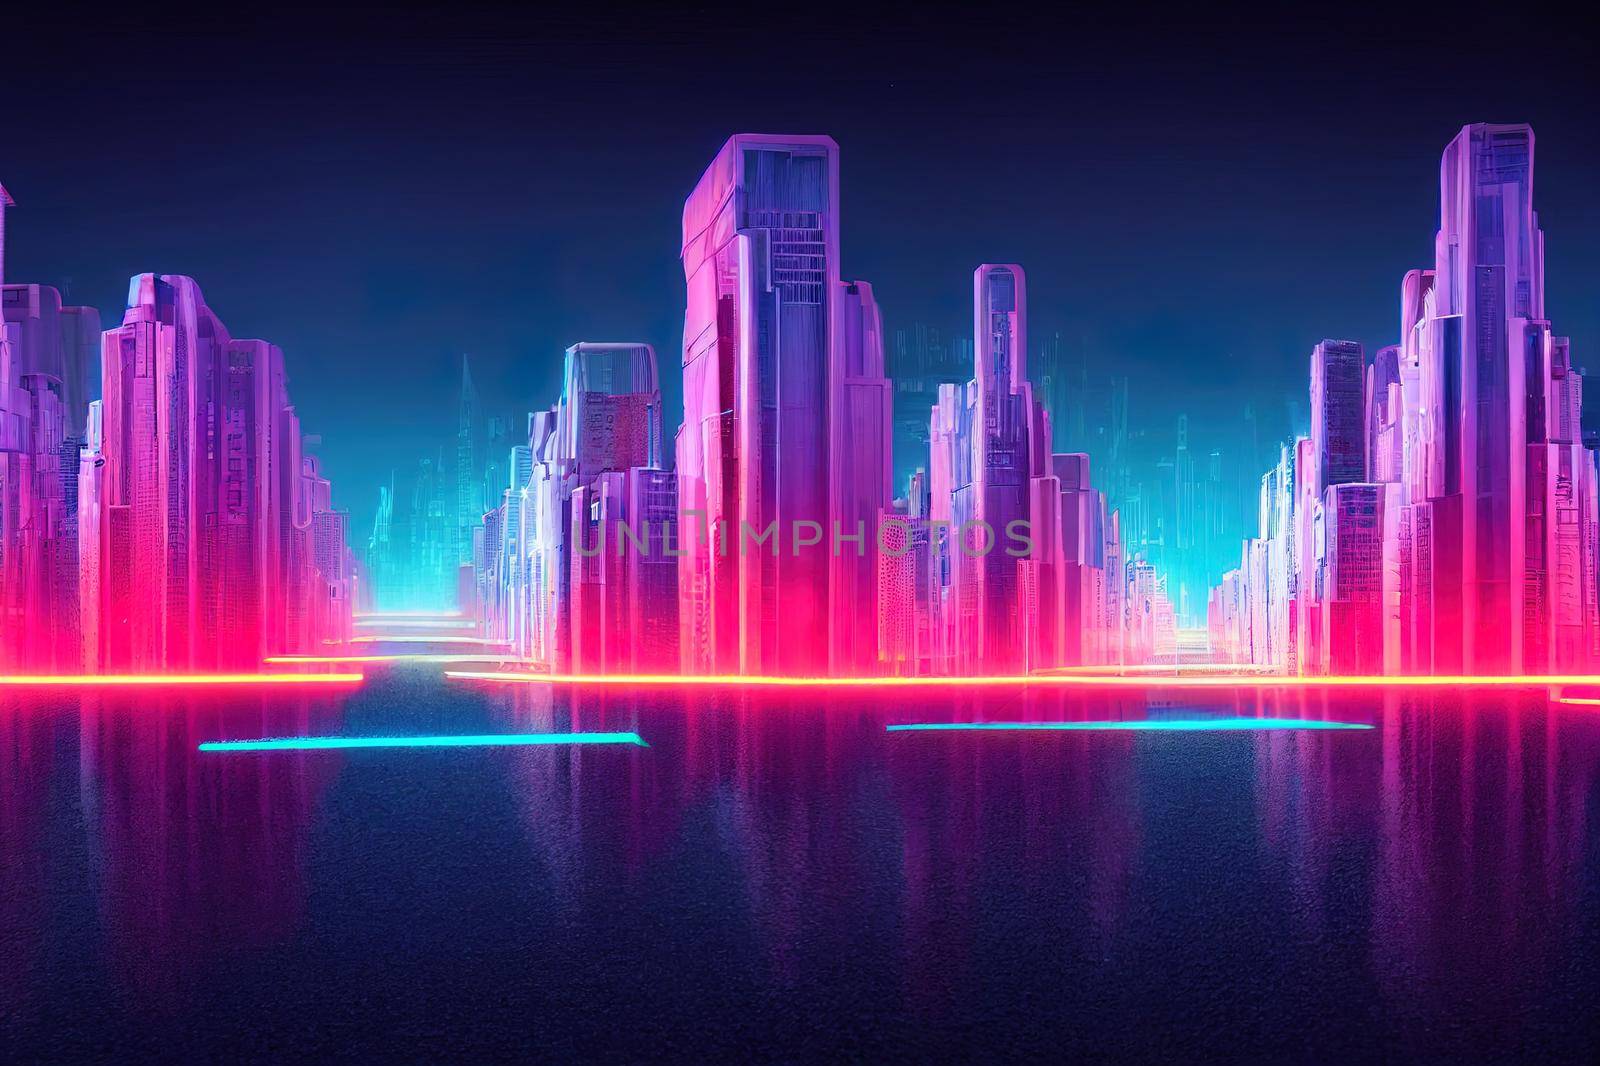 3D Rendering of neon mega city with light reflection from puddles on street heading toward buildings. Concept for night life, business district center CBDCyber punk theme, tech background. High quality illustration